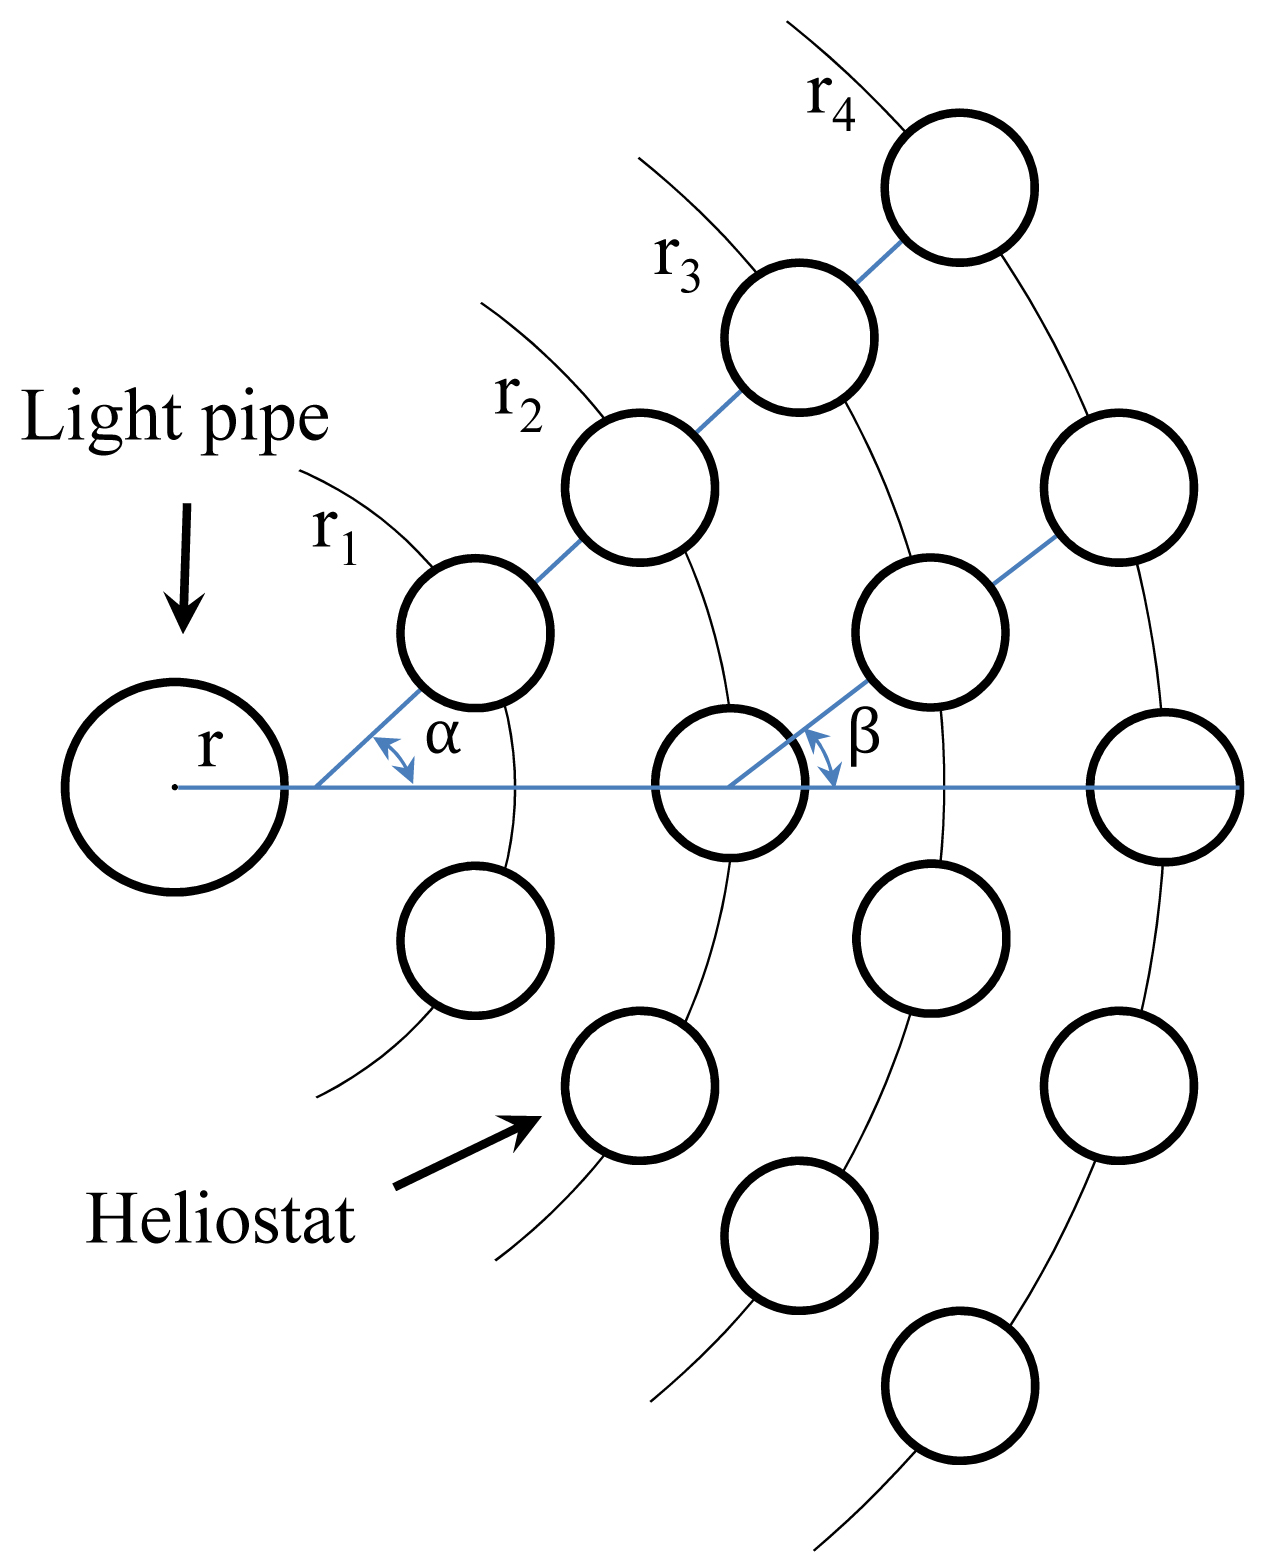 Representing arrangement of heliostats and the light pipe in different arcs of radii r1,r2, r3, r4.